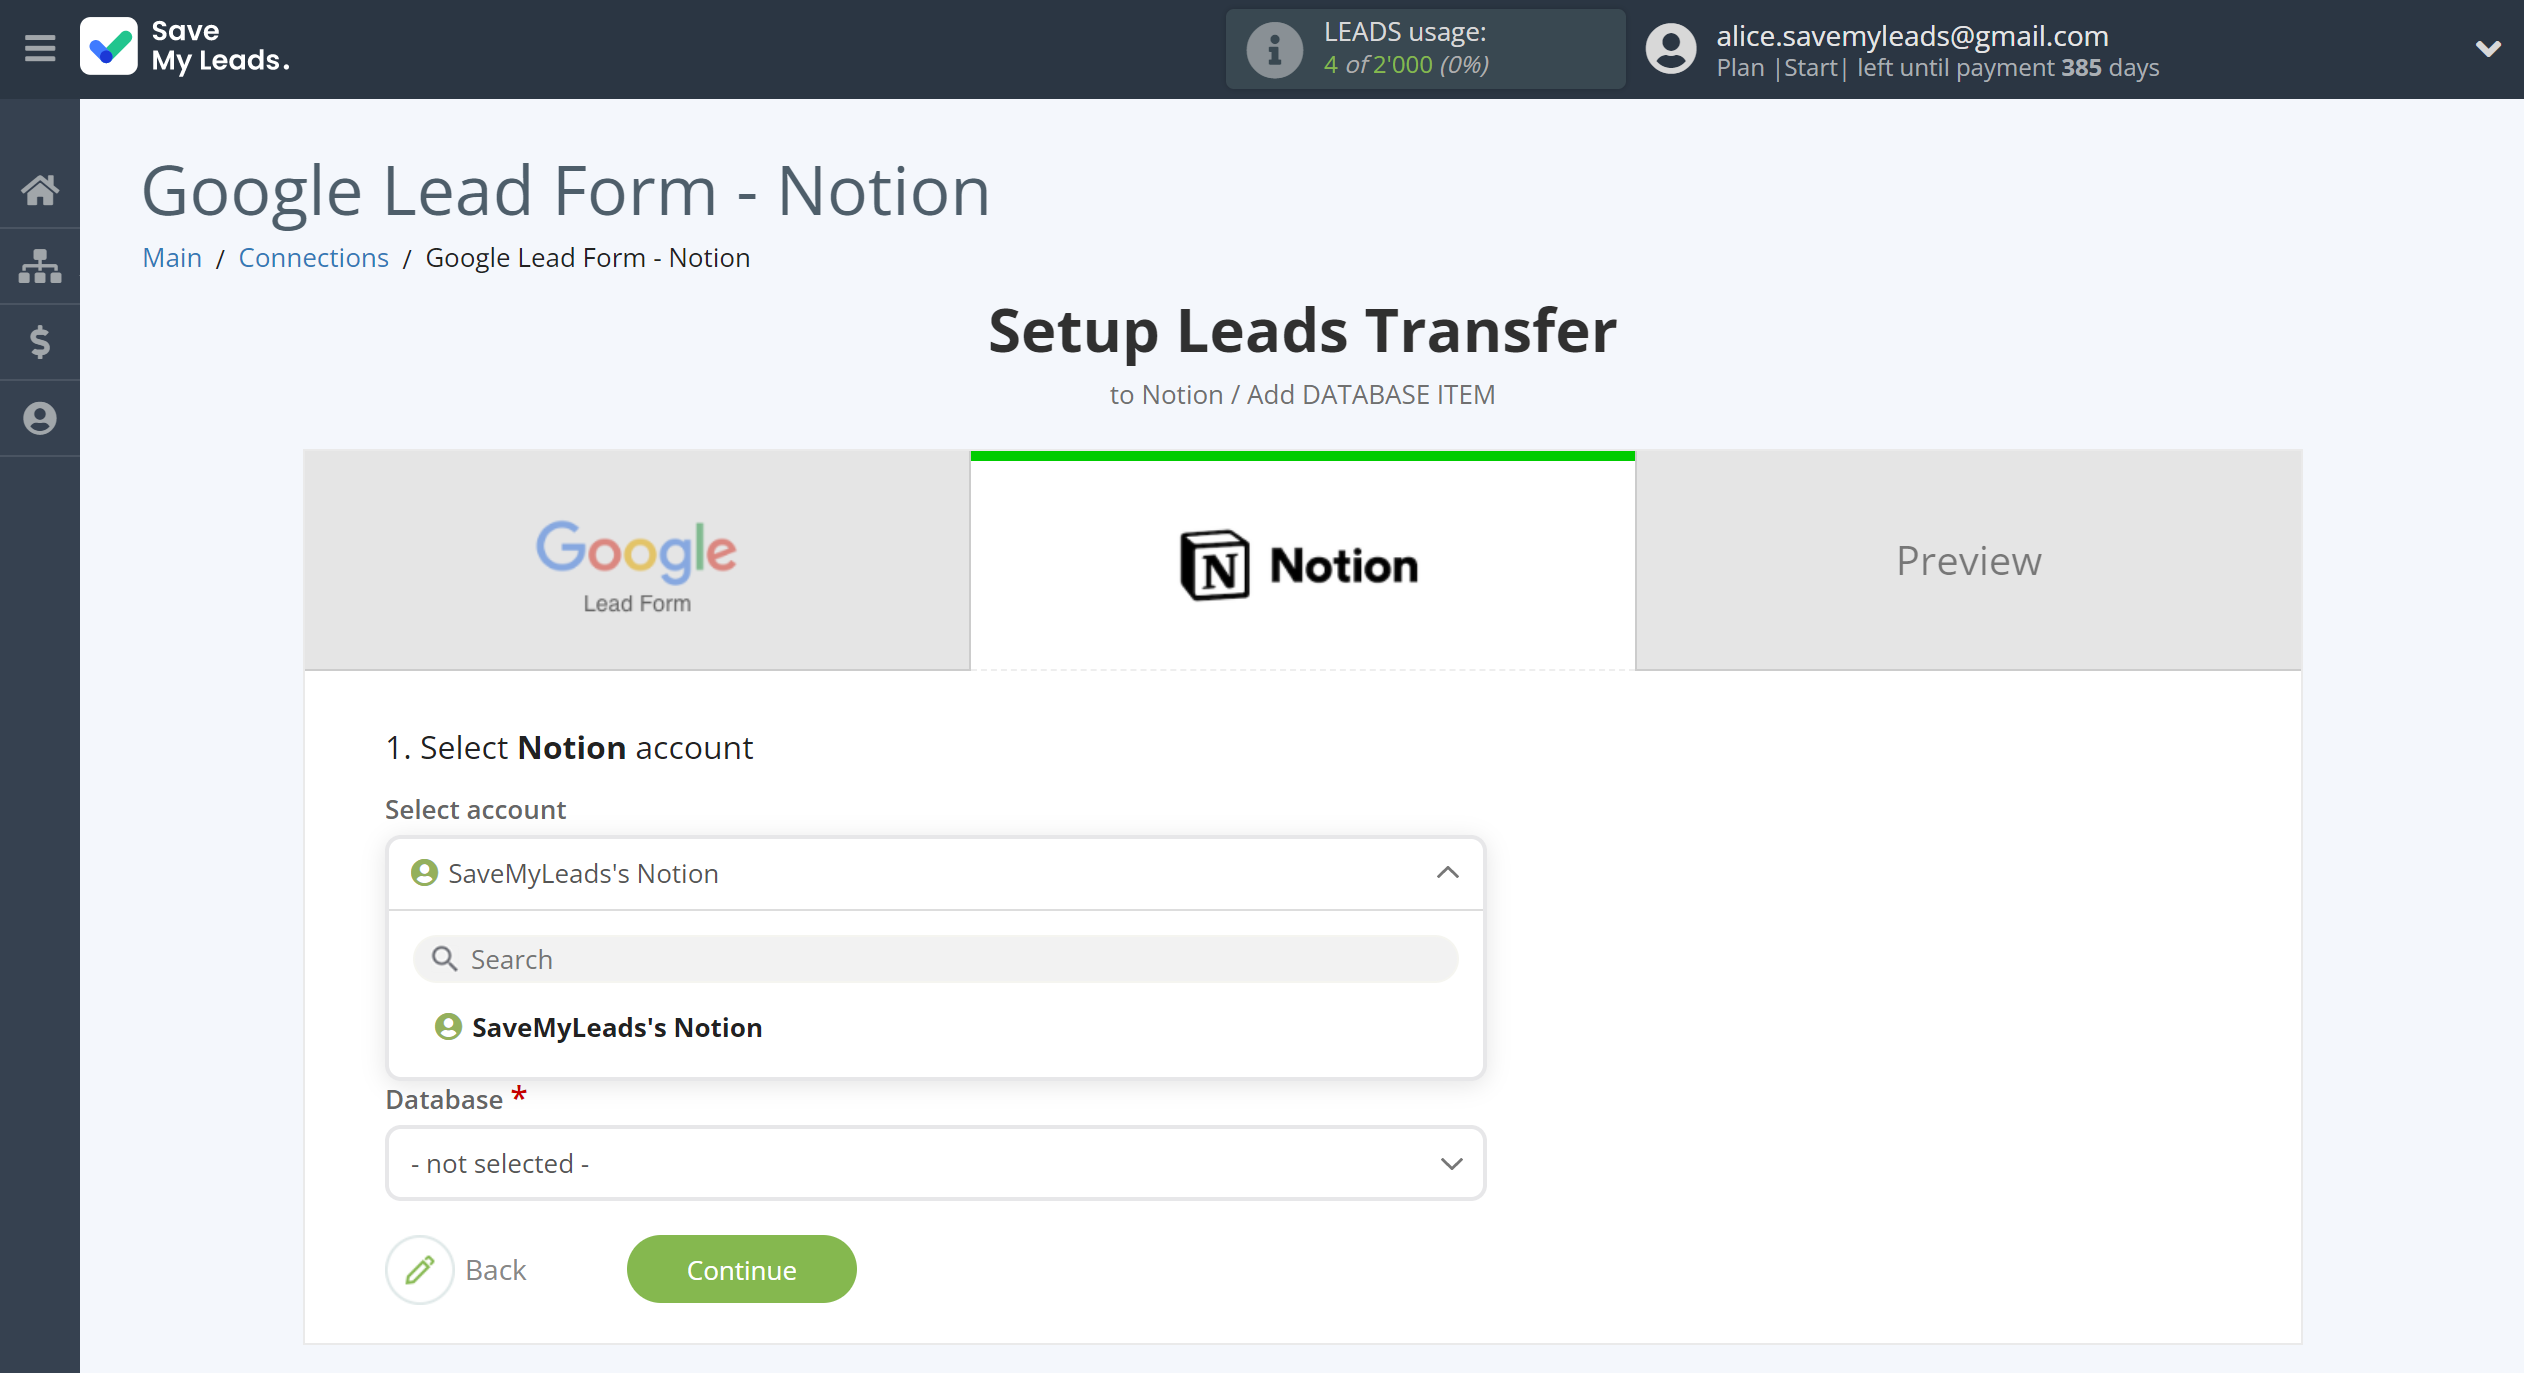 How to Connect Google Lead Form with Notion | Data Destination account selection